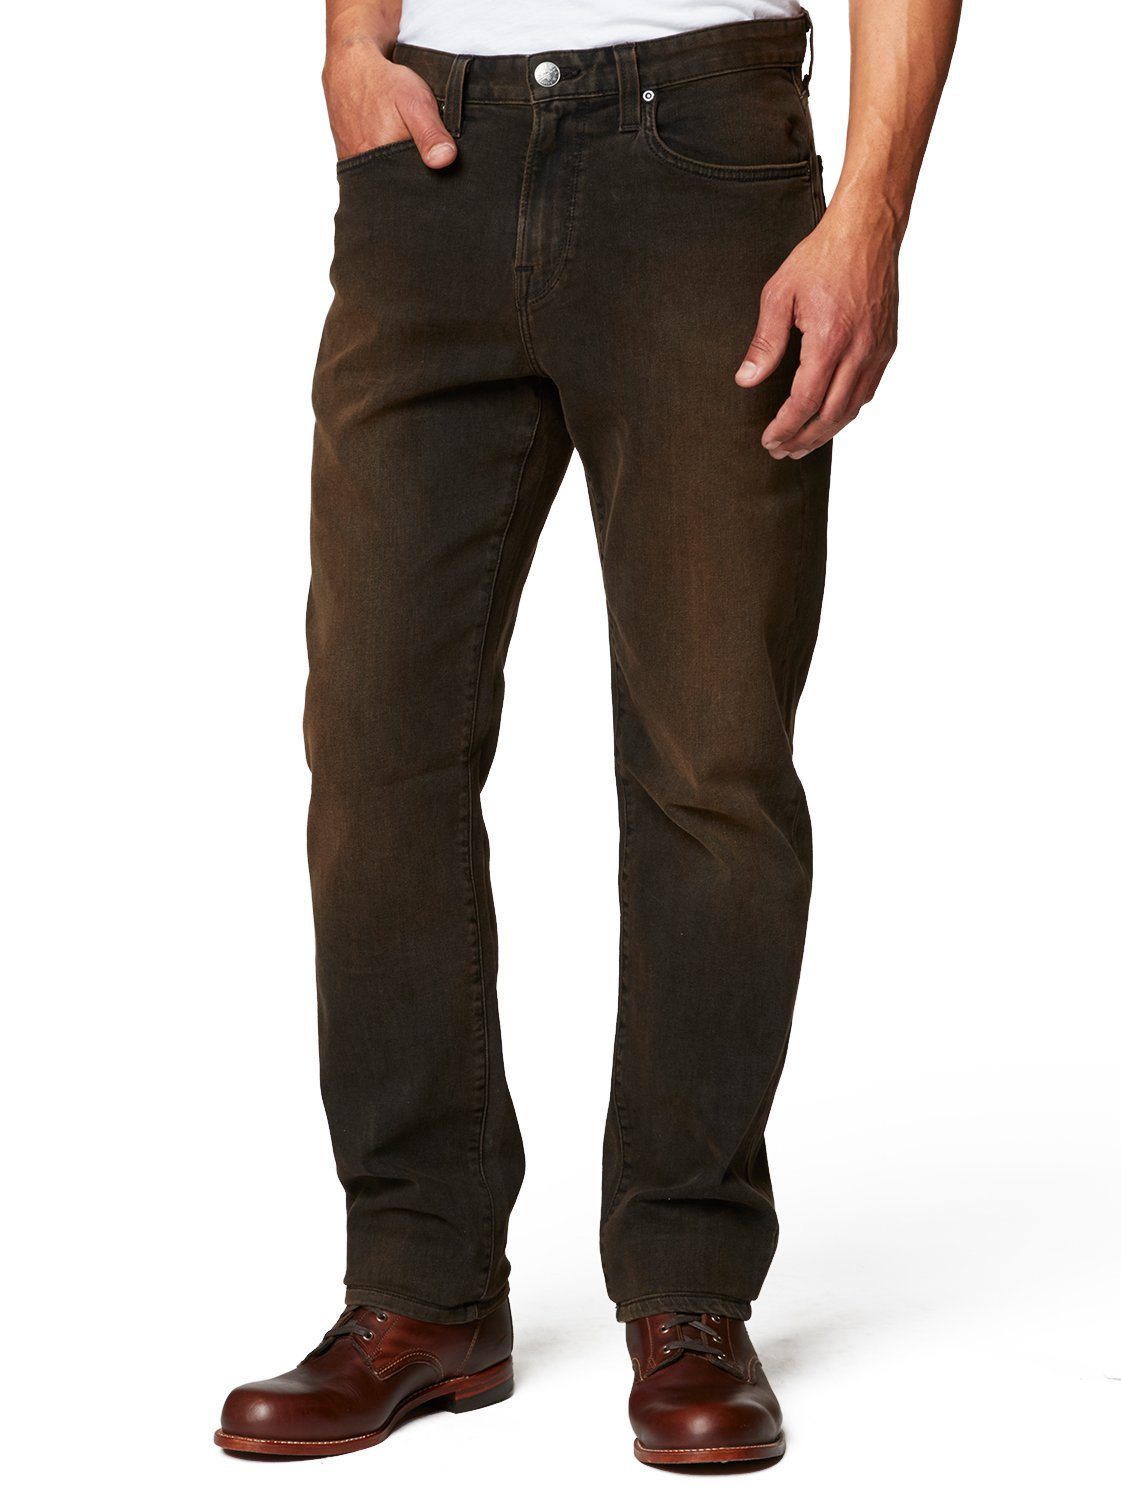 Shop Agave Denim No. 7 Relaxed Fit Dark Chocolate Flex In Brown